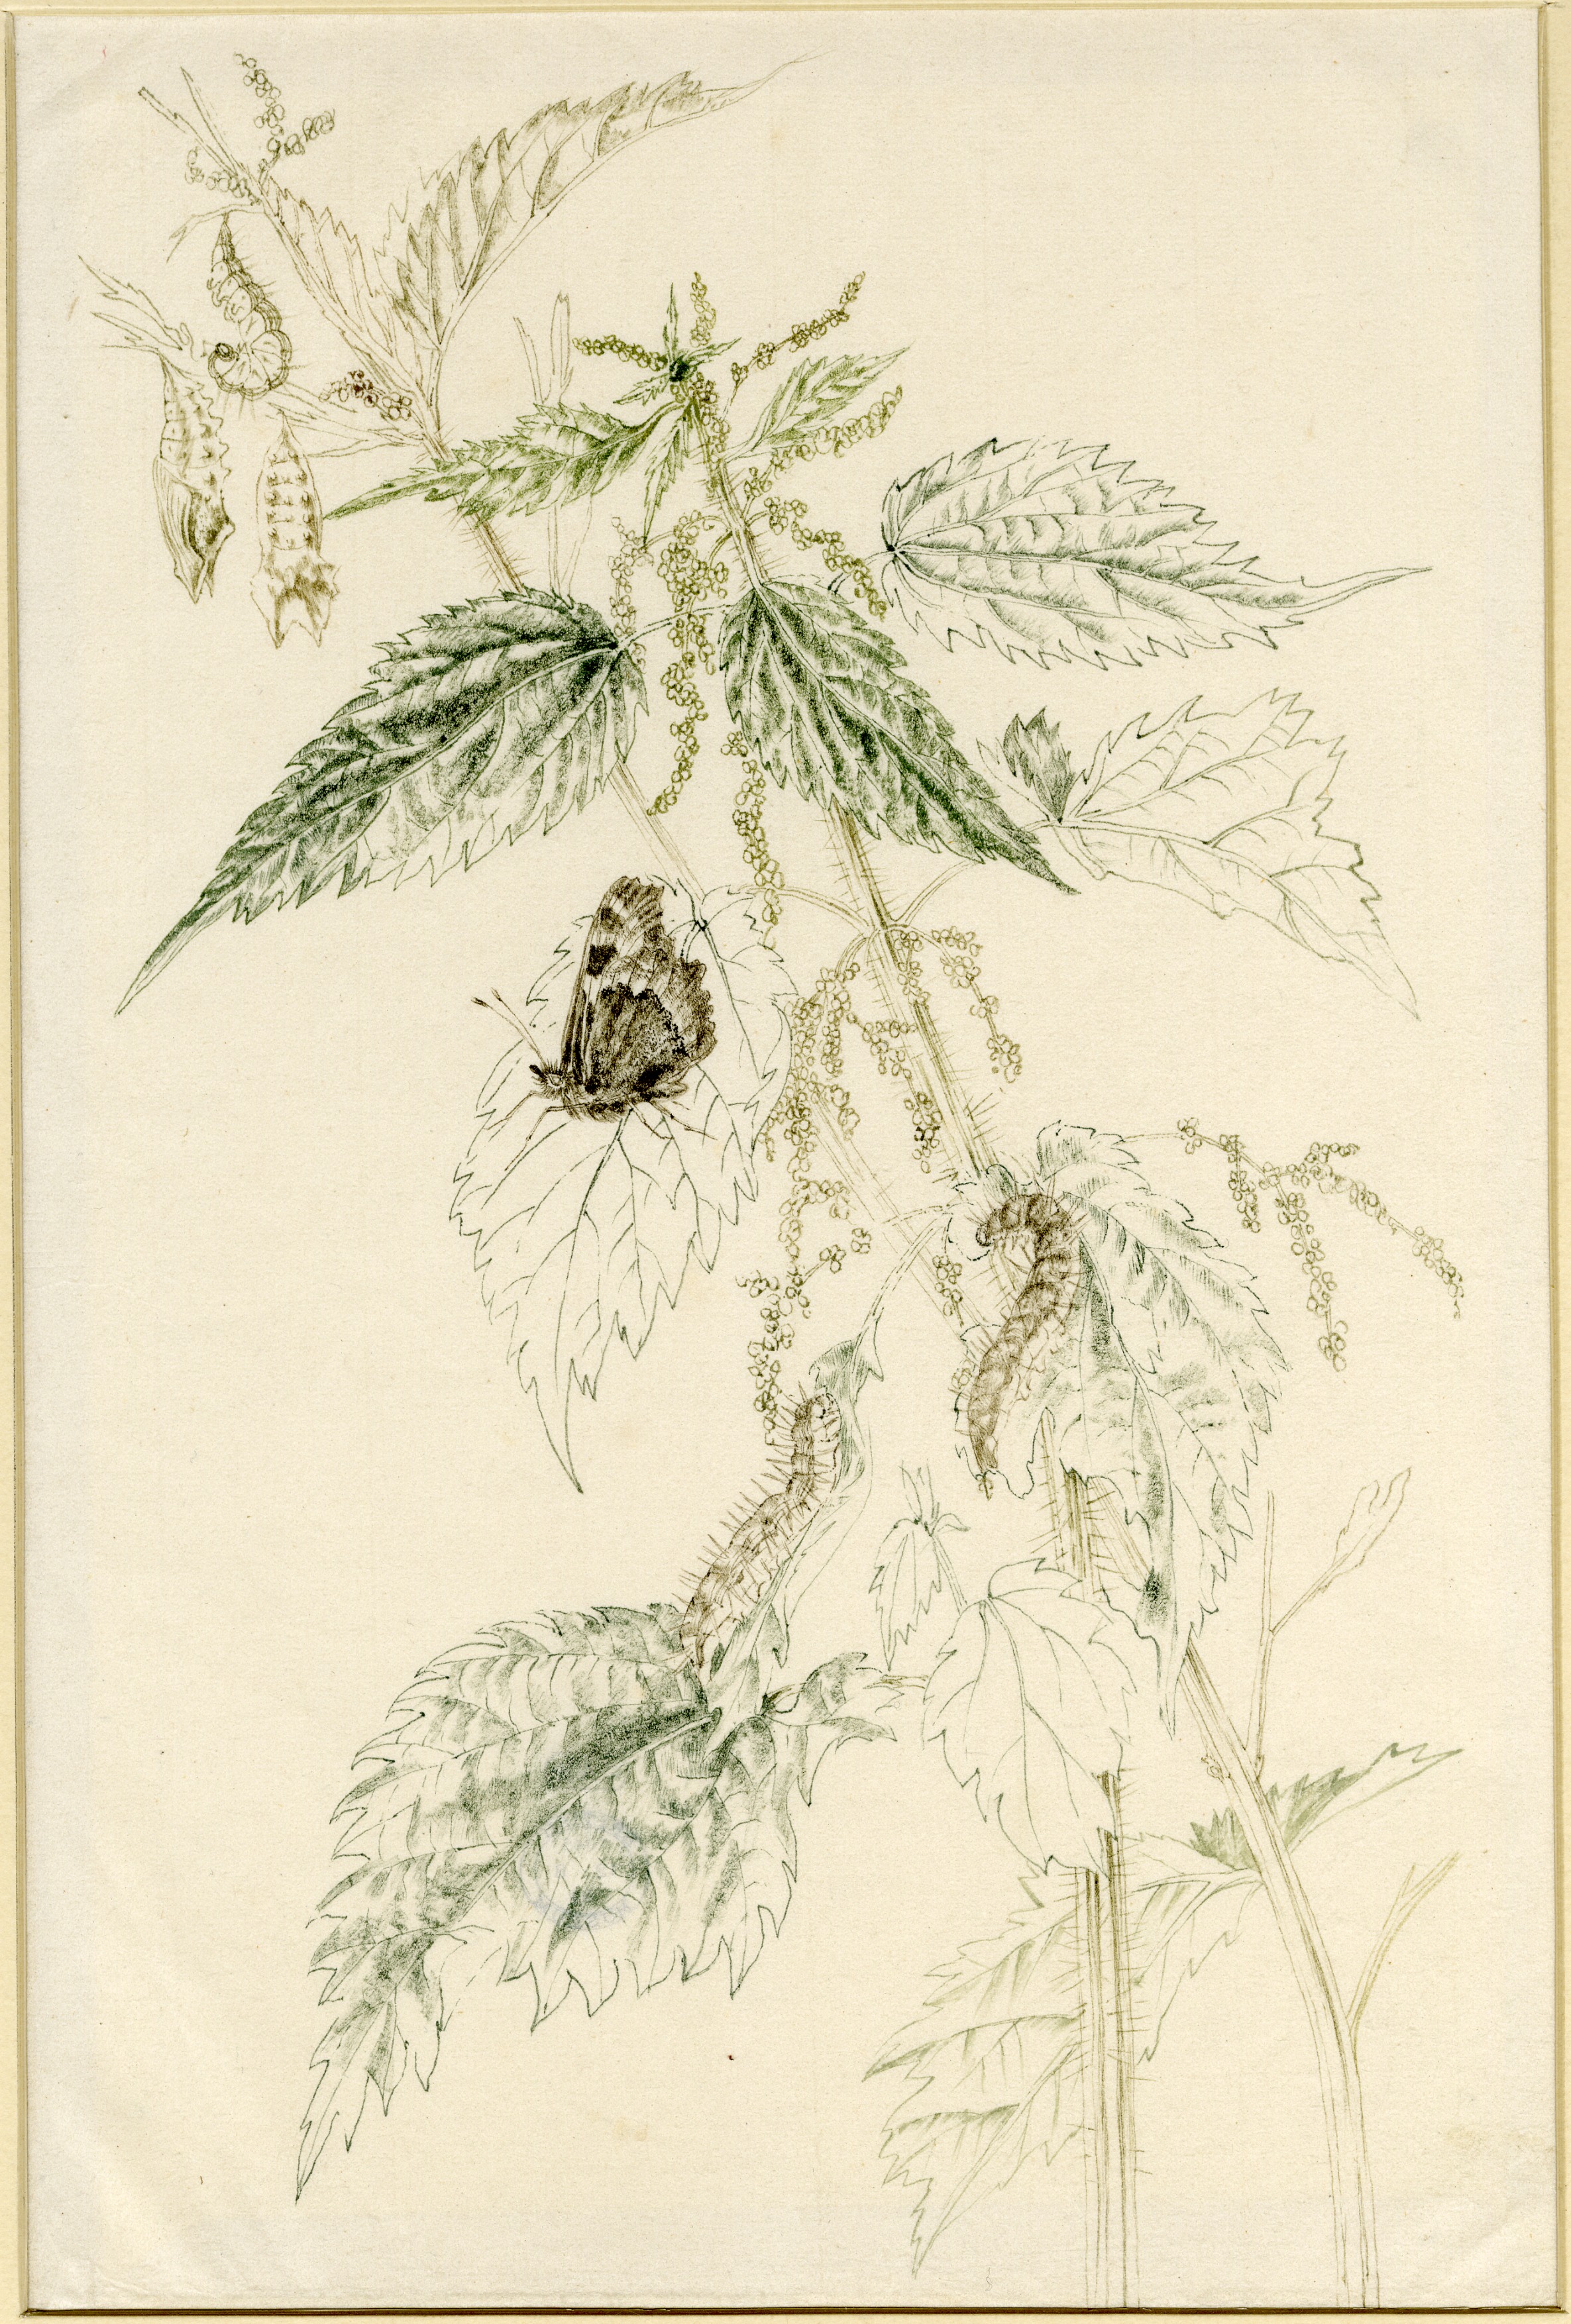 Stinging nettles with butterfly and caterpillar (circa 1940)